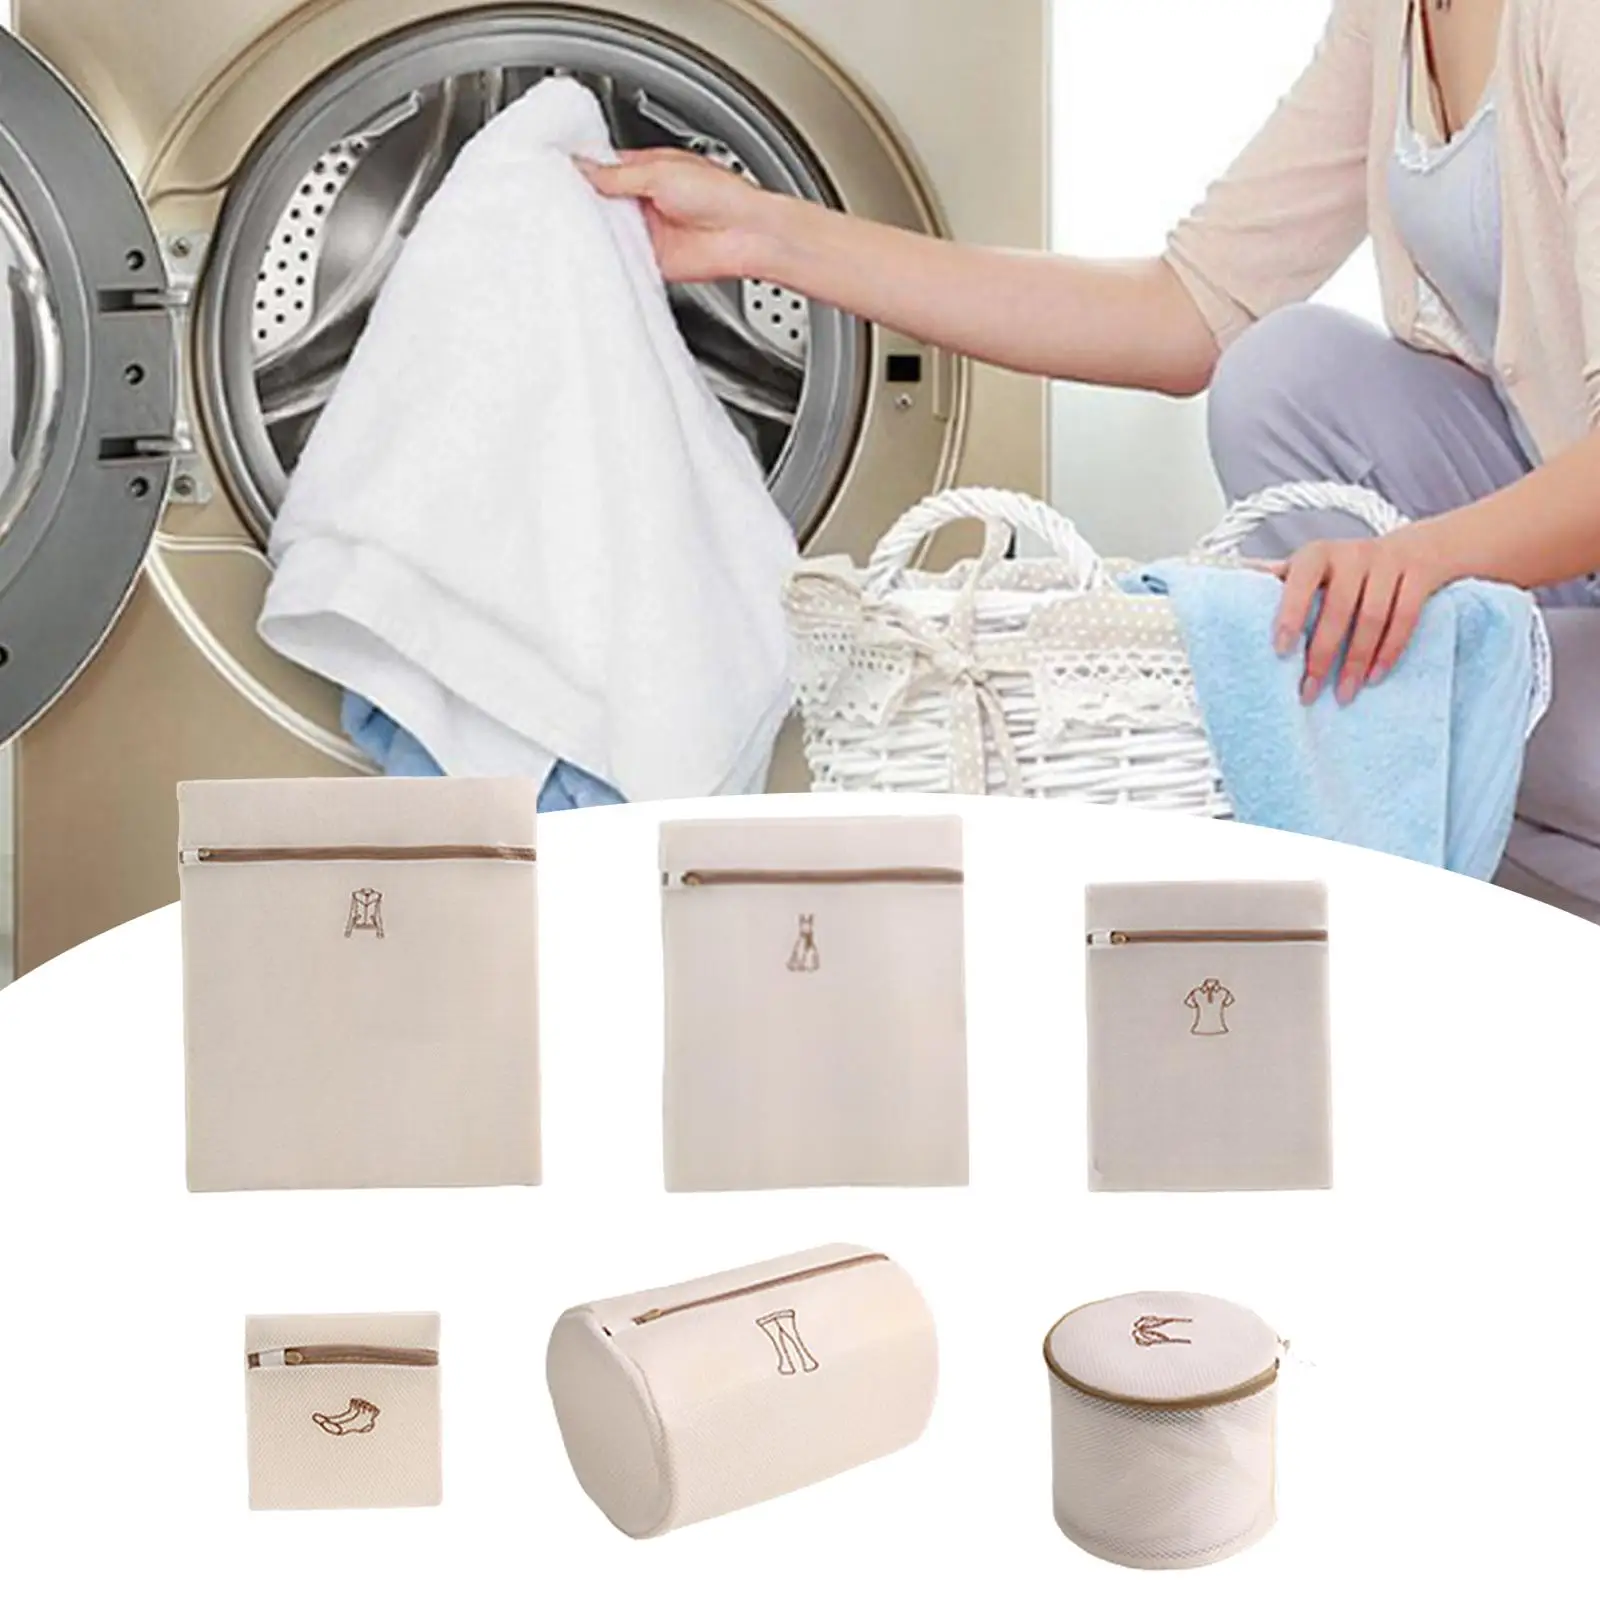 Mesh Laundry Bags Thickened with Premium Zipper Durable Household Delicates Wash Bag for Blouse Tops Underwear Lingerie T Shirt